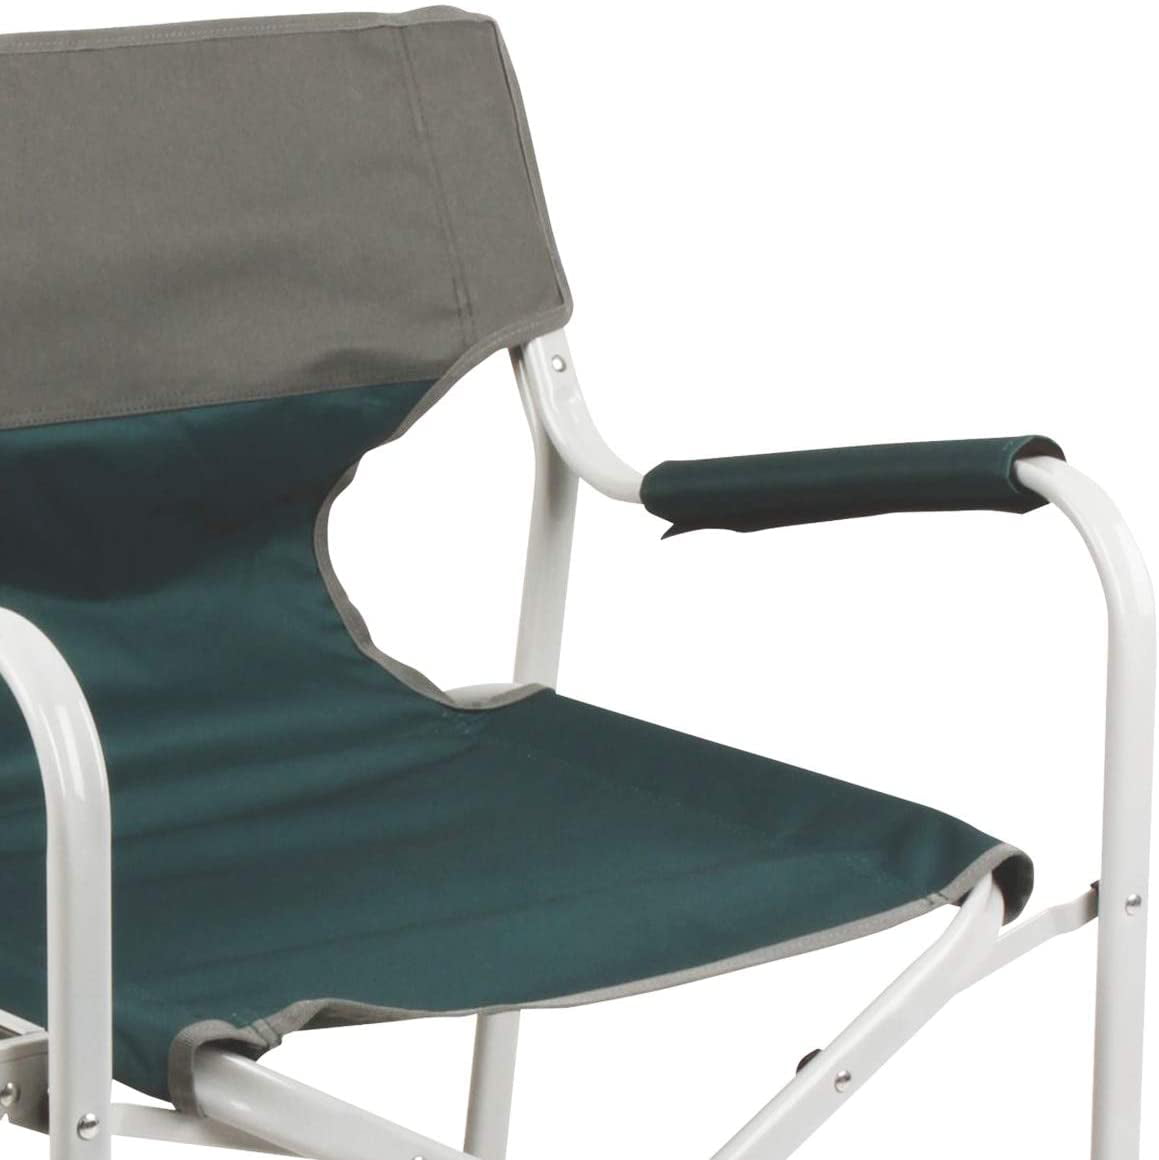 Coleman Outpost Breeze Portable Folding Deck Chair with Side Table 